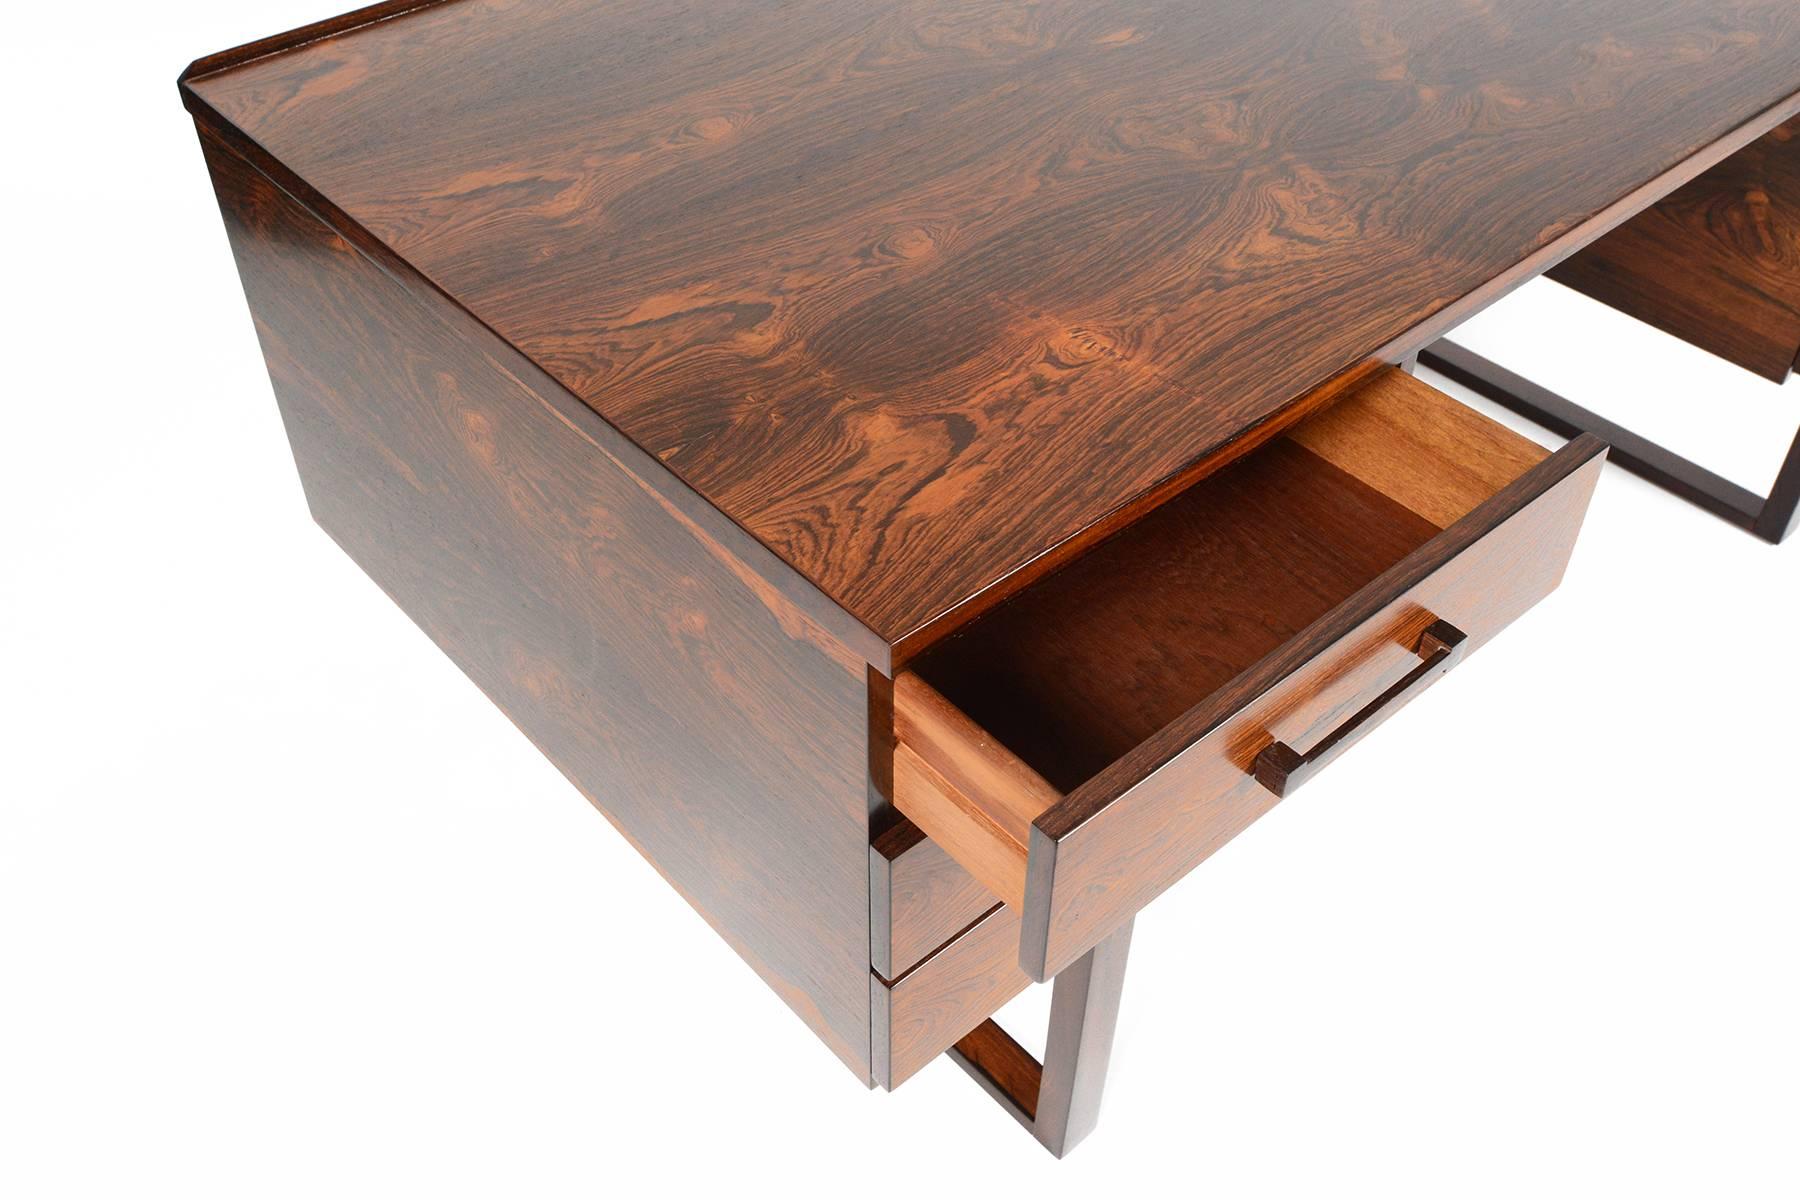 This rare Danish modern executive desk was designed by Henning Jensen and Torben Valeur in the 1960s. Crafted in Brazilian rosewood, the top slab features vivid cathedral grain patterns. The spacious kneehole is nestled between two banks of drawers.